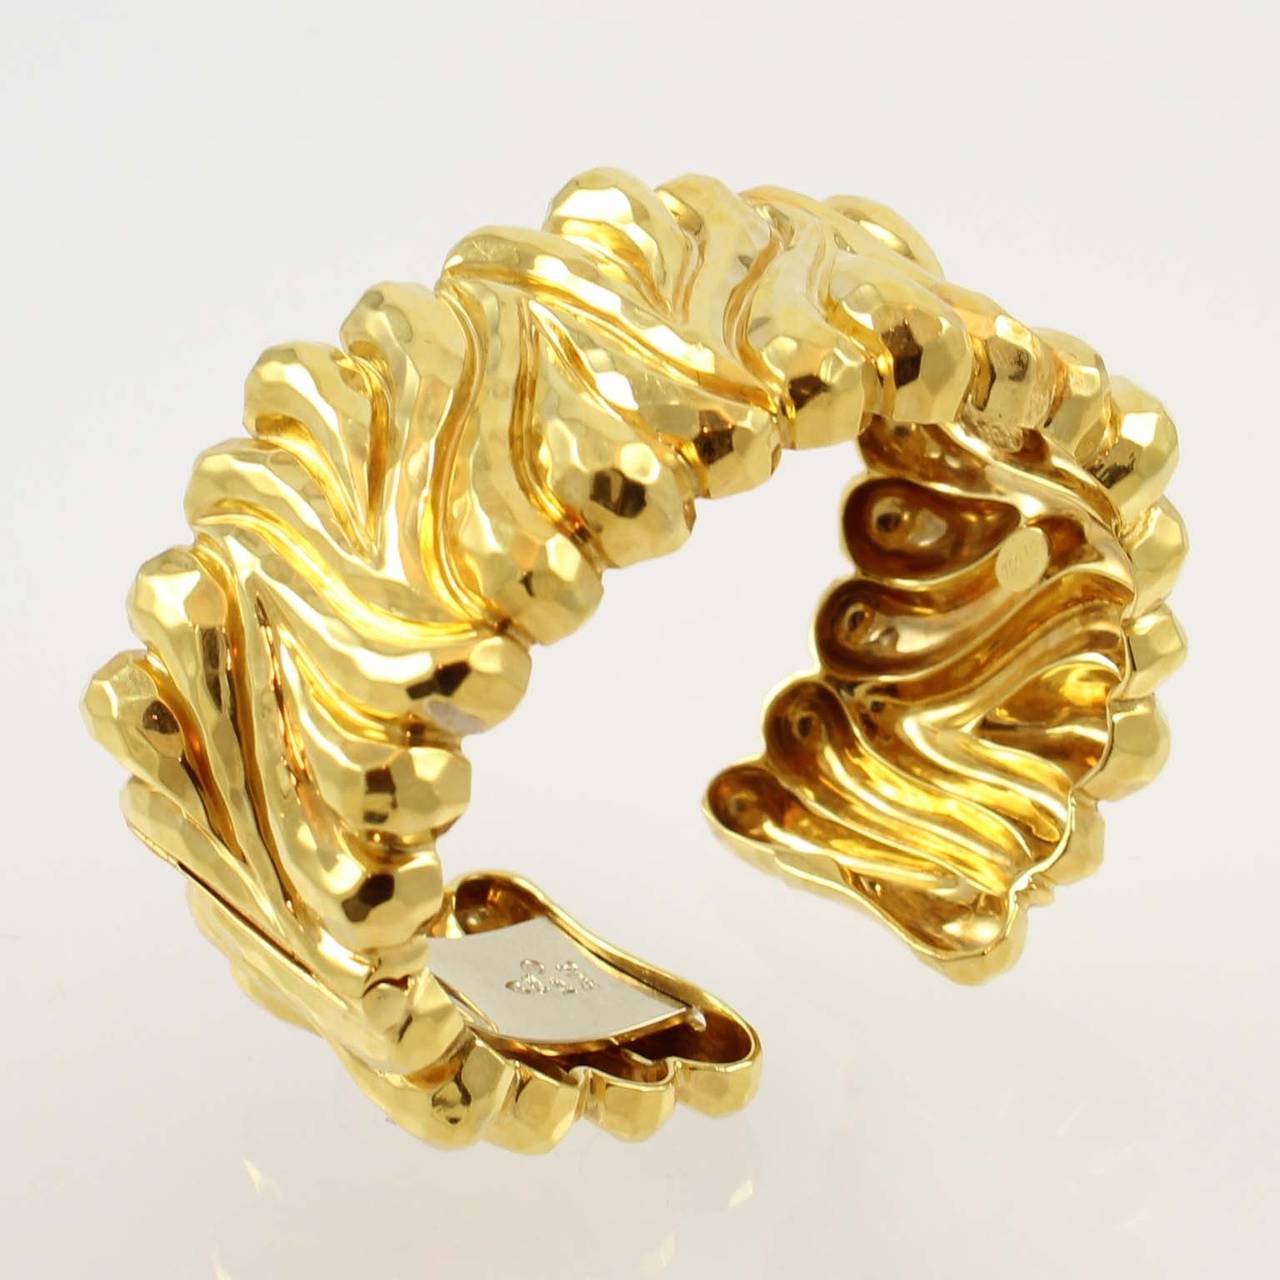 Henry Dunay 18K yellow gold faceted cuff bracelet, with a hinge, weighs 106.52 grams.